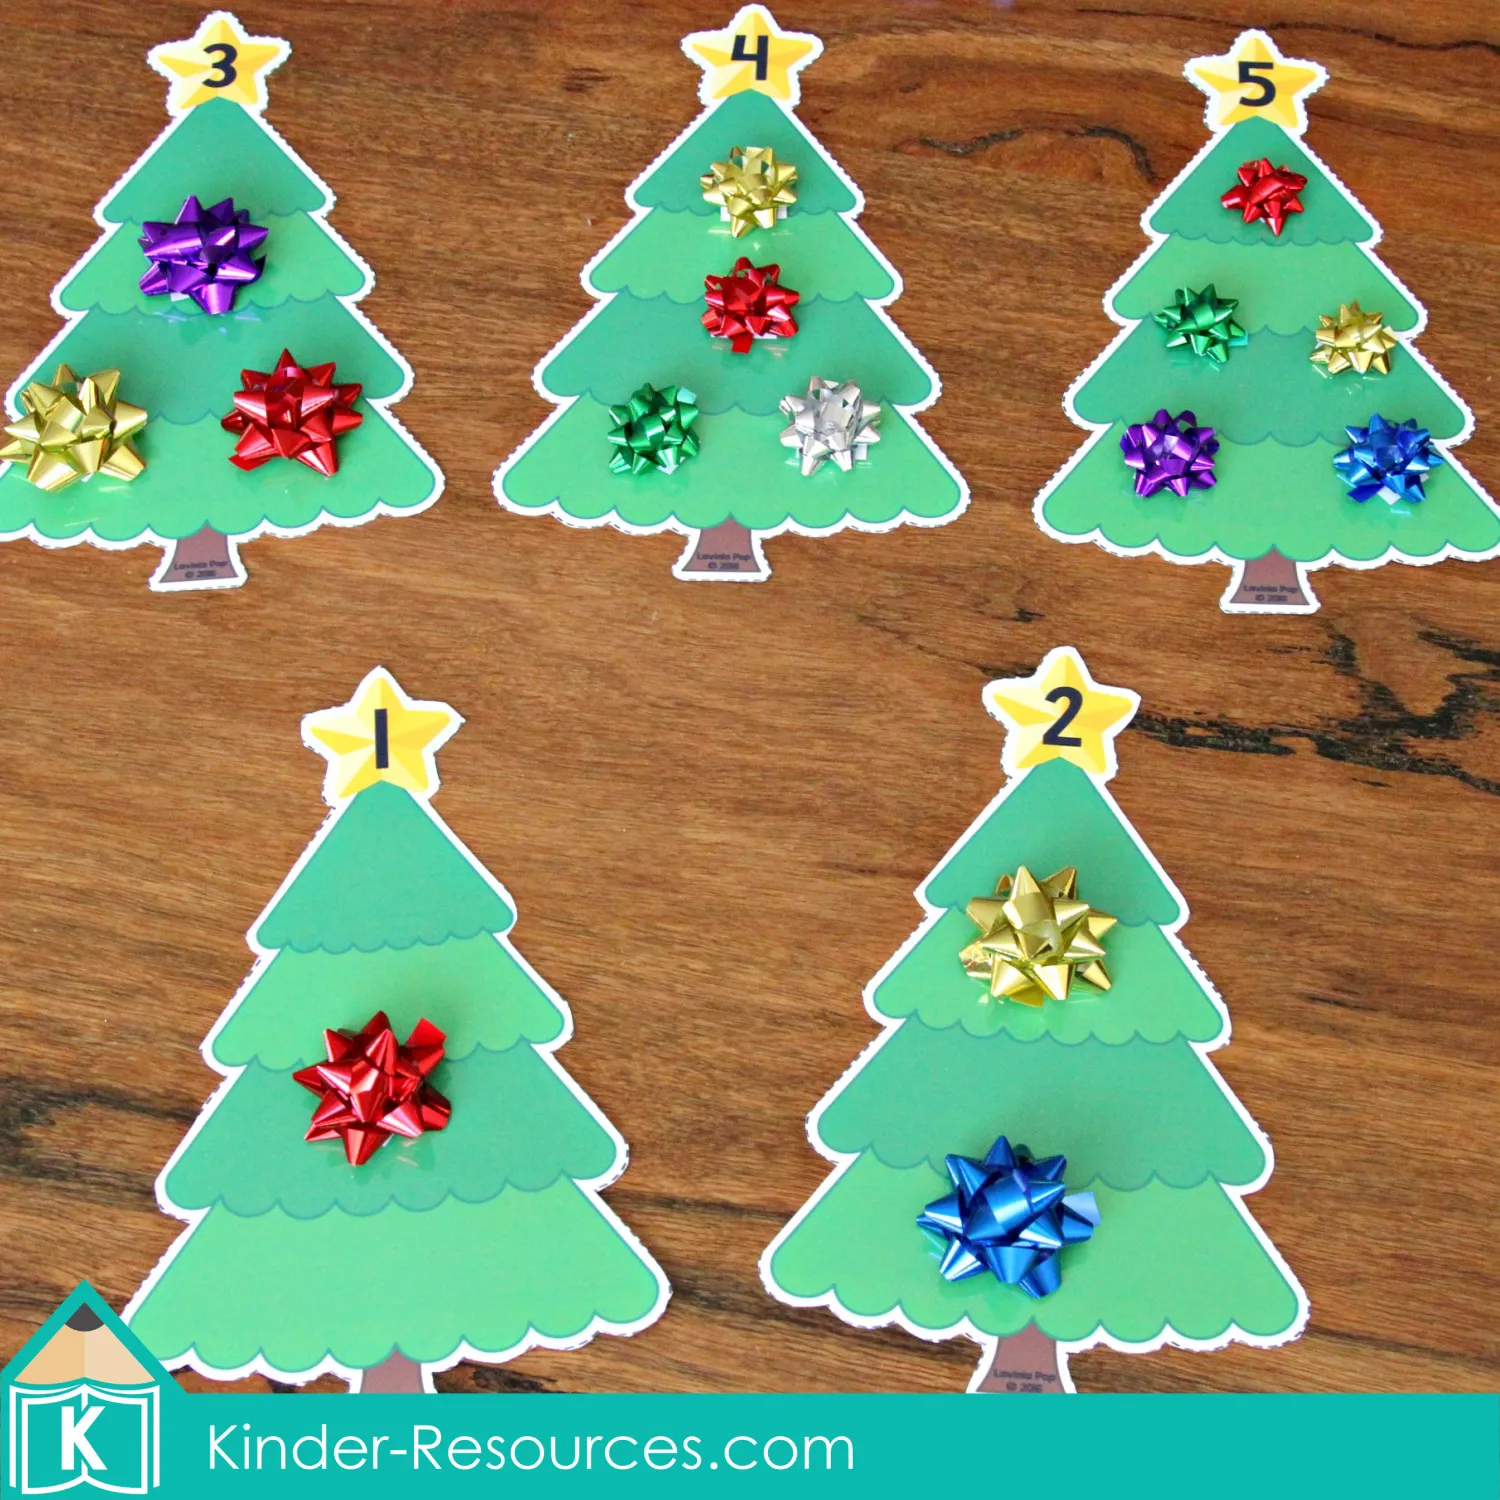 Christmas Centers for Preschool | Morning Tubs / Bins - Kinder Resources